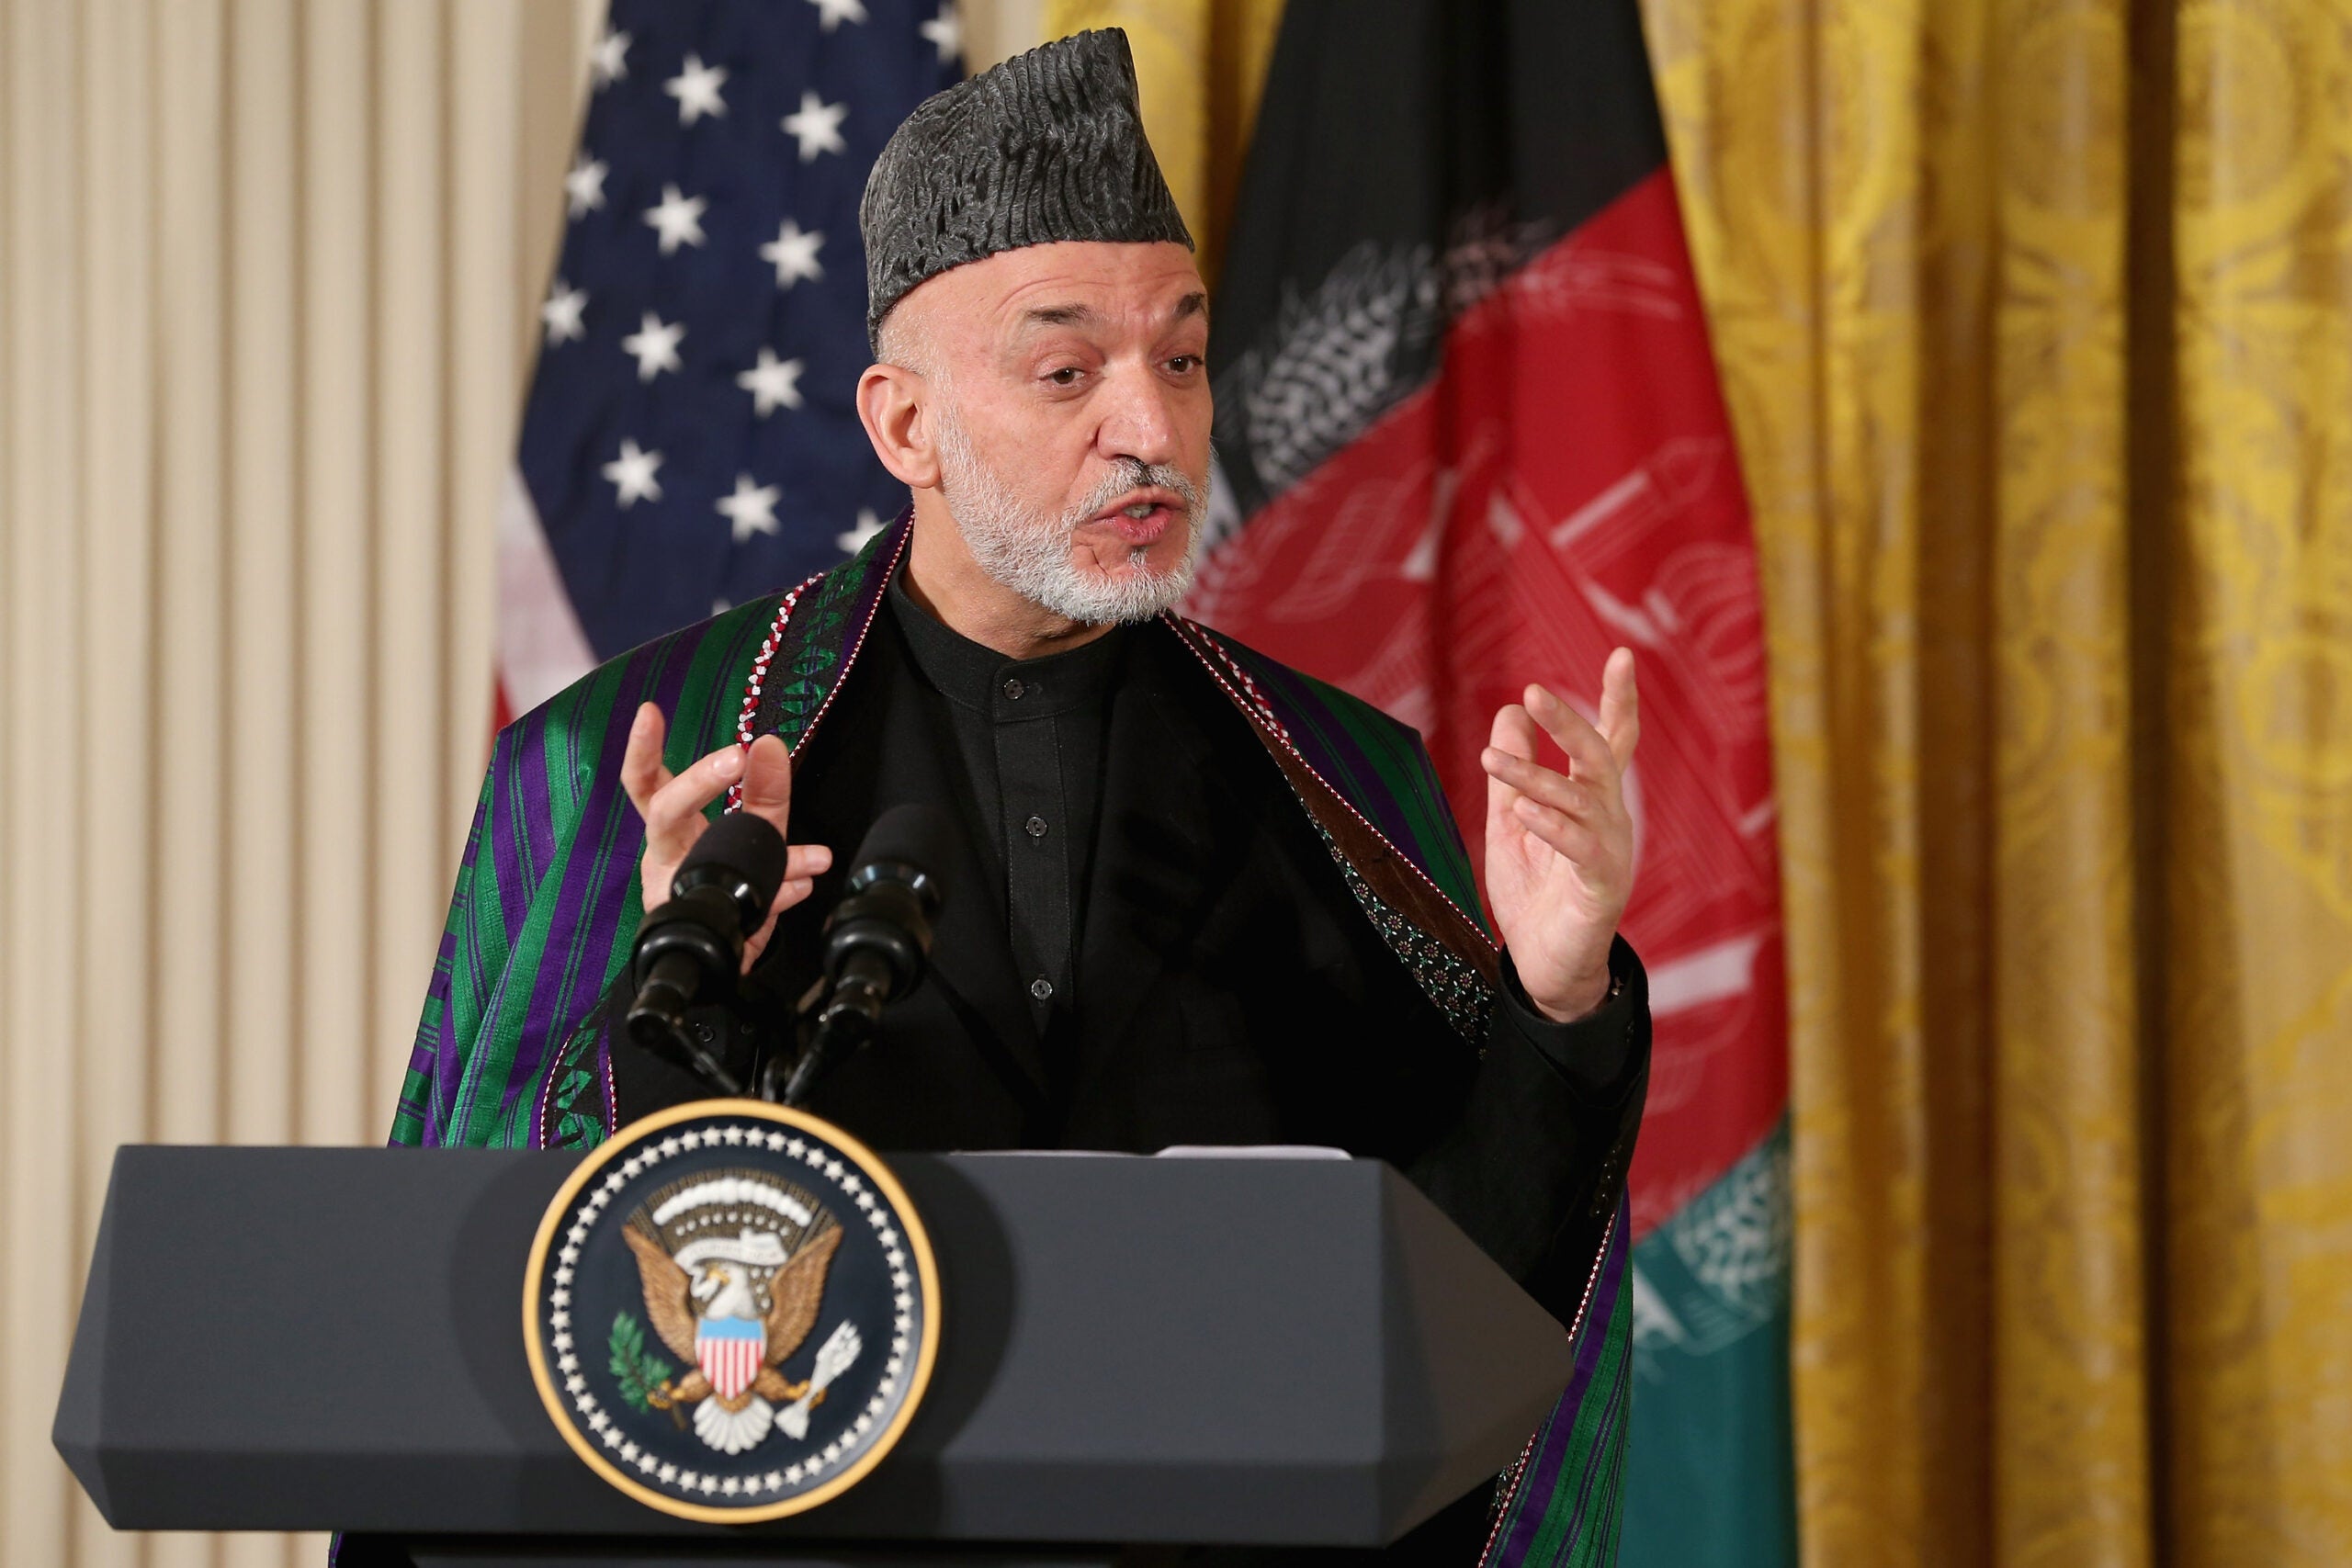 WASHINGTON, DC - JANUARY 11:  Afghan President Hamid Karzai speaks during a joint news conference with U.S. President Barack Obama in the East Room of the White House January 11, 2013 in Washington, DC. Karzai is in Washington for face-to-face meetings with Obama and senior members of his administration about the future of American commitment to Afghanistan and when troops may leave the country after more than 10 years of war.  (Photo by Chip Somodevilla/Getty Images)